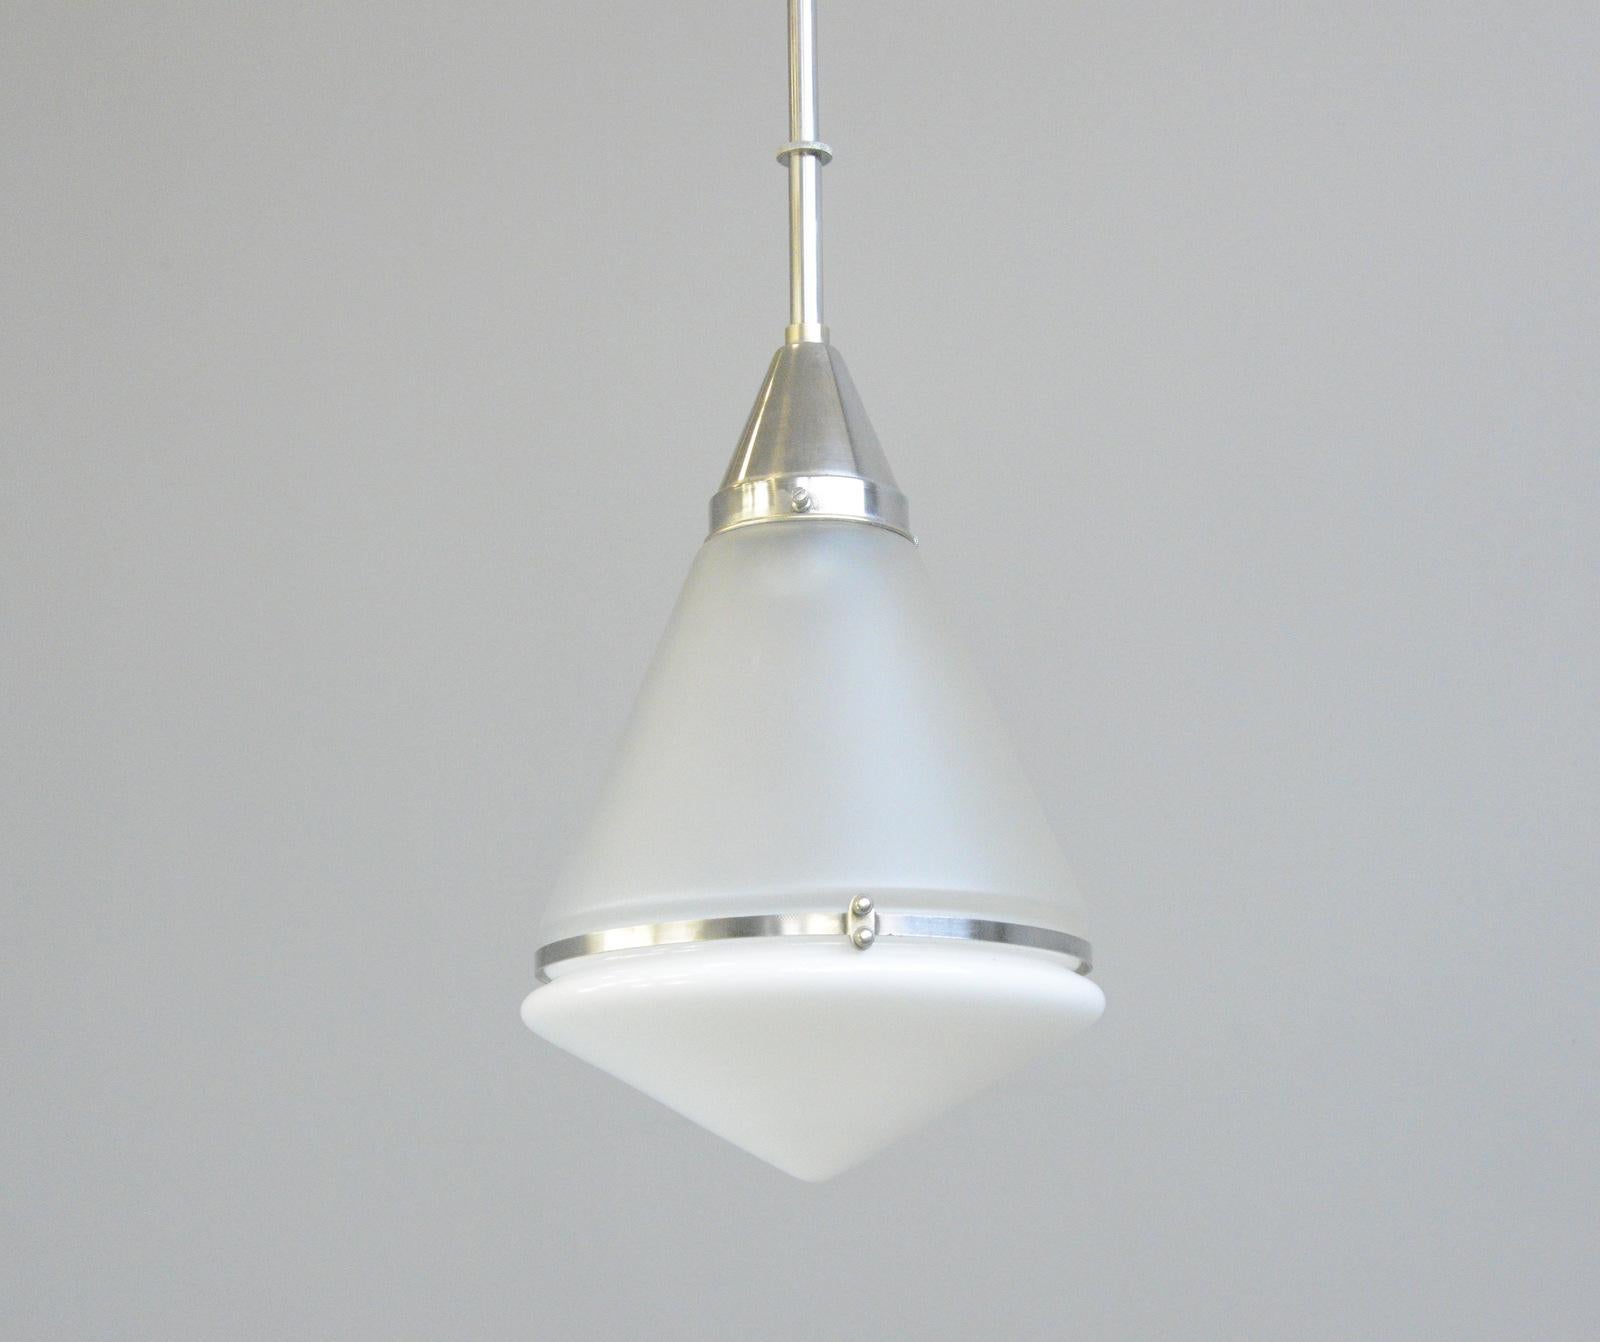 Luzette Pendant Light by Peter Behrens for Siemens circa 1920s For Sale 2